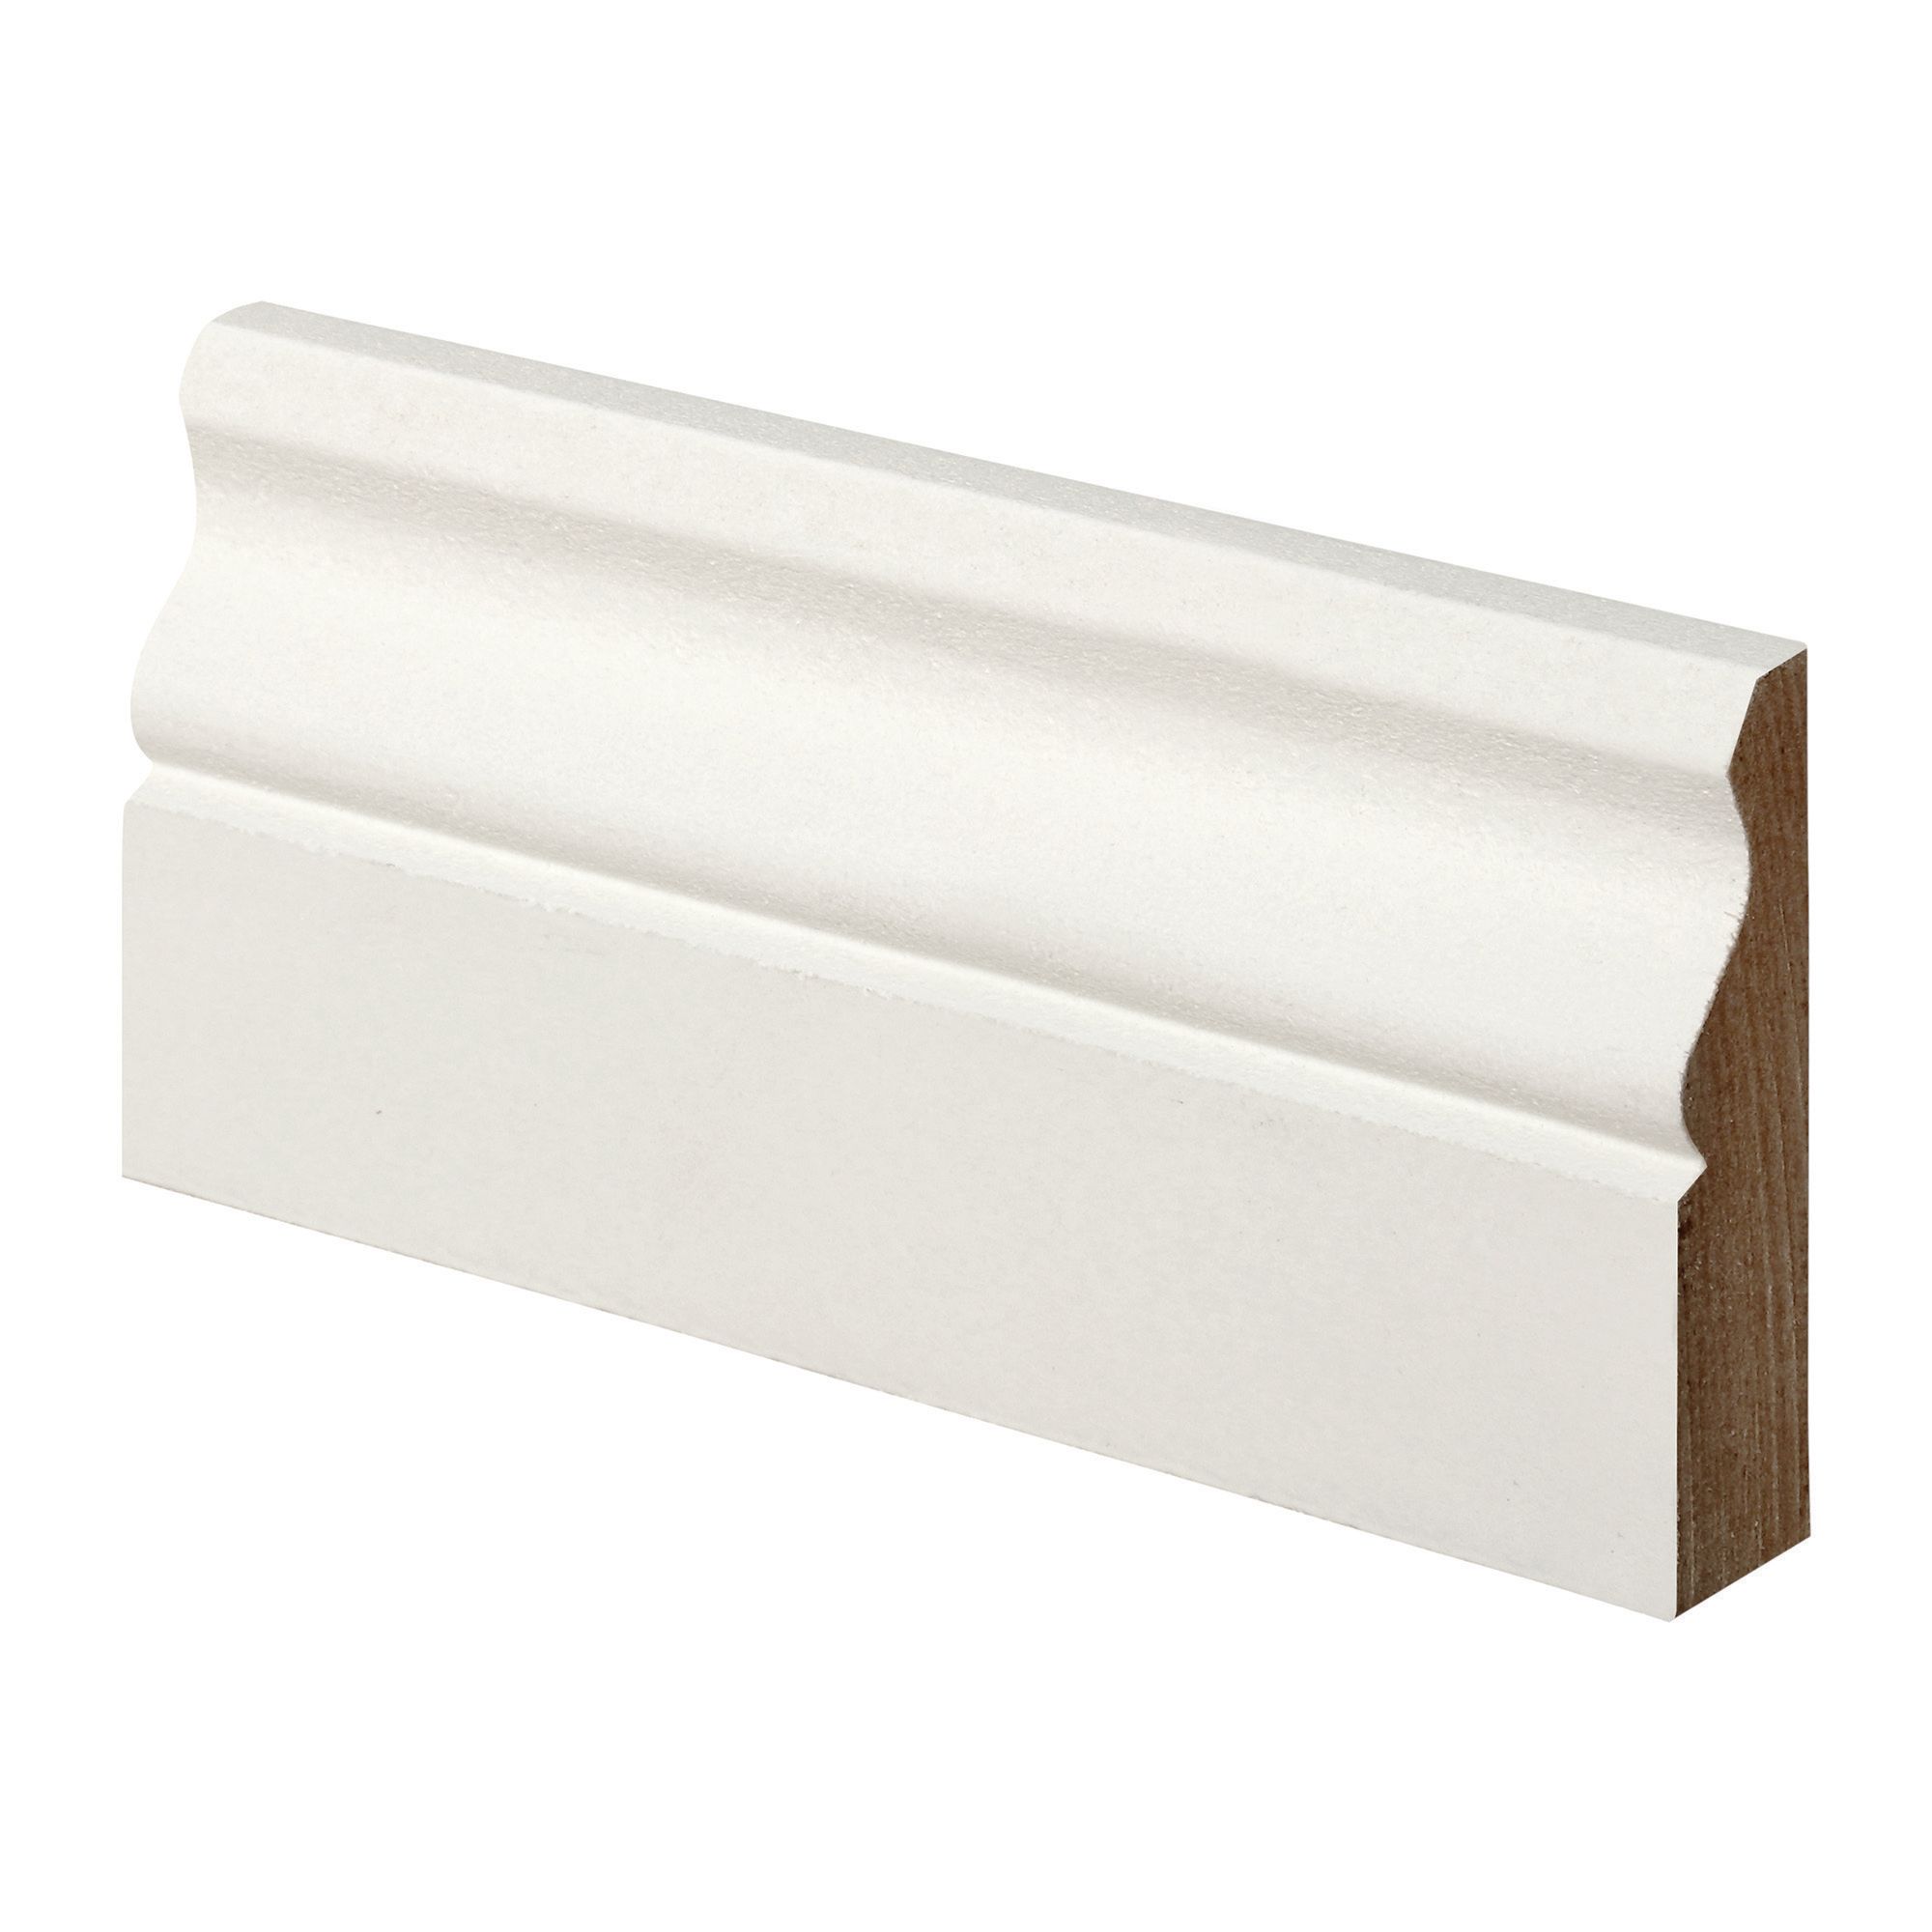 Image of Wickes Ogee Primed MDF Architrave - 18mm x 69mm x 2.1m Pack of 5